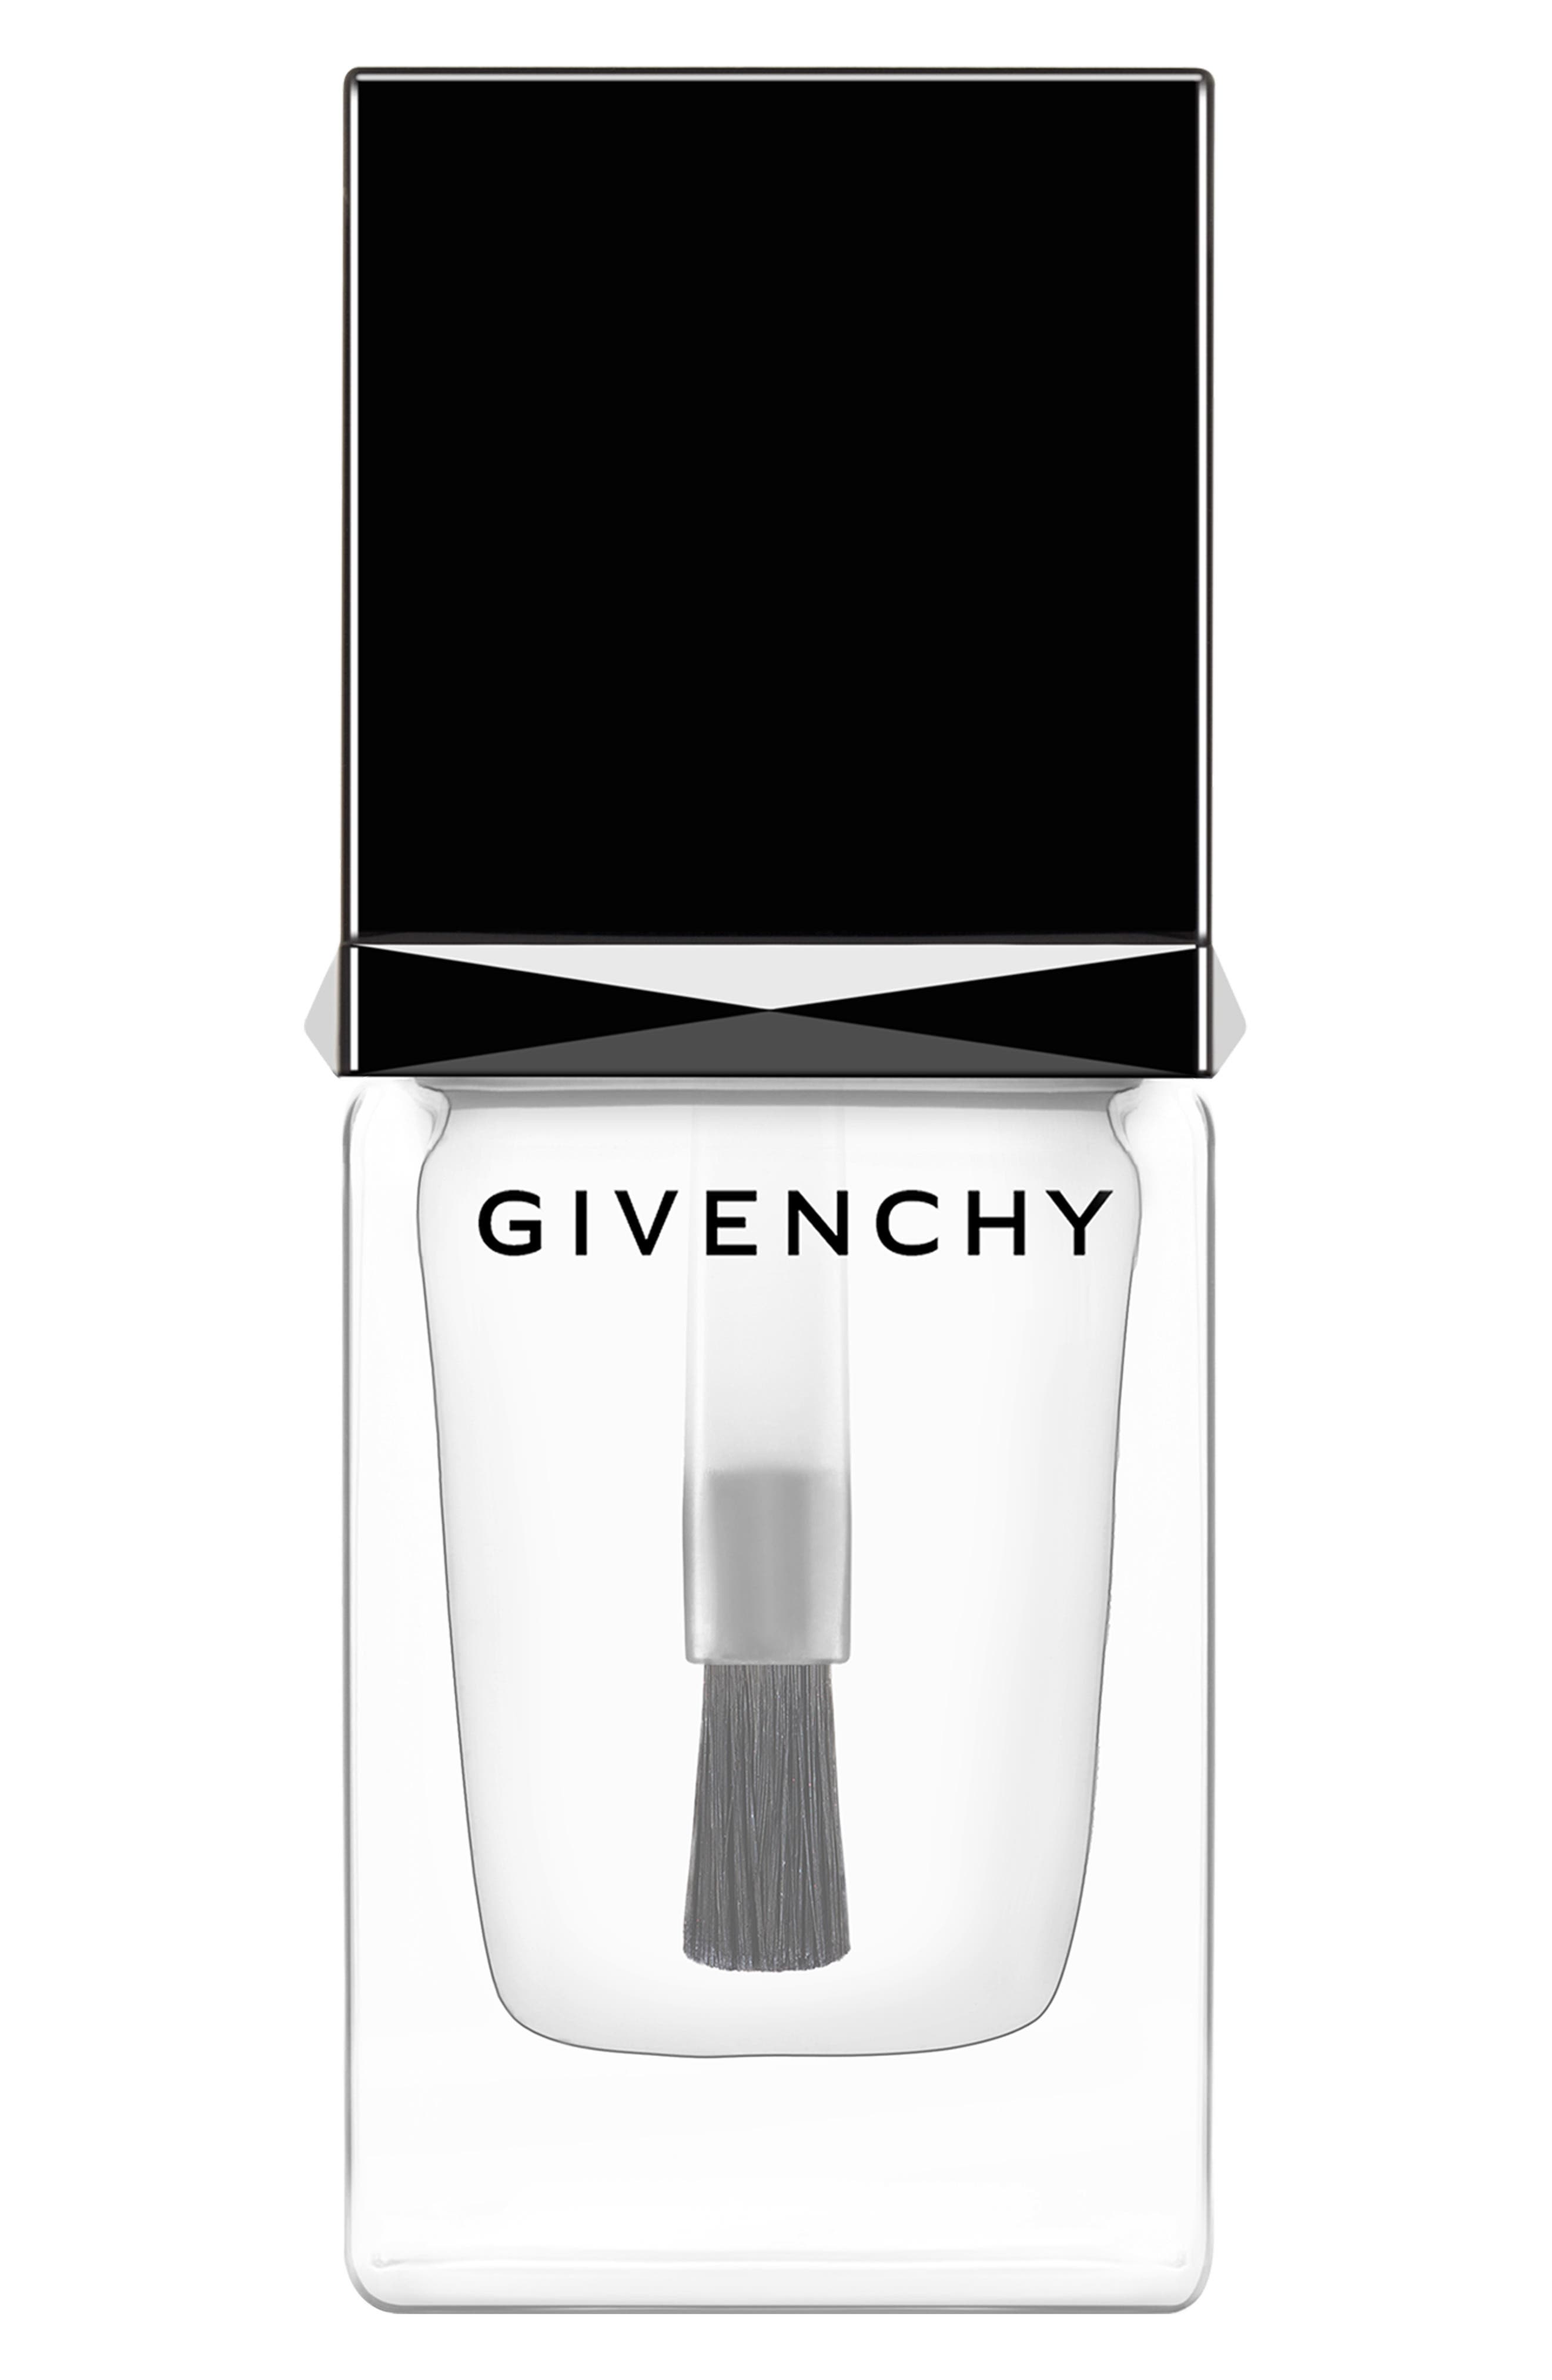 givenchy makeup best sellers